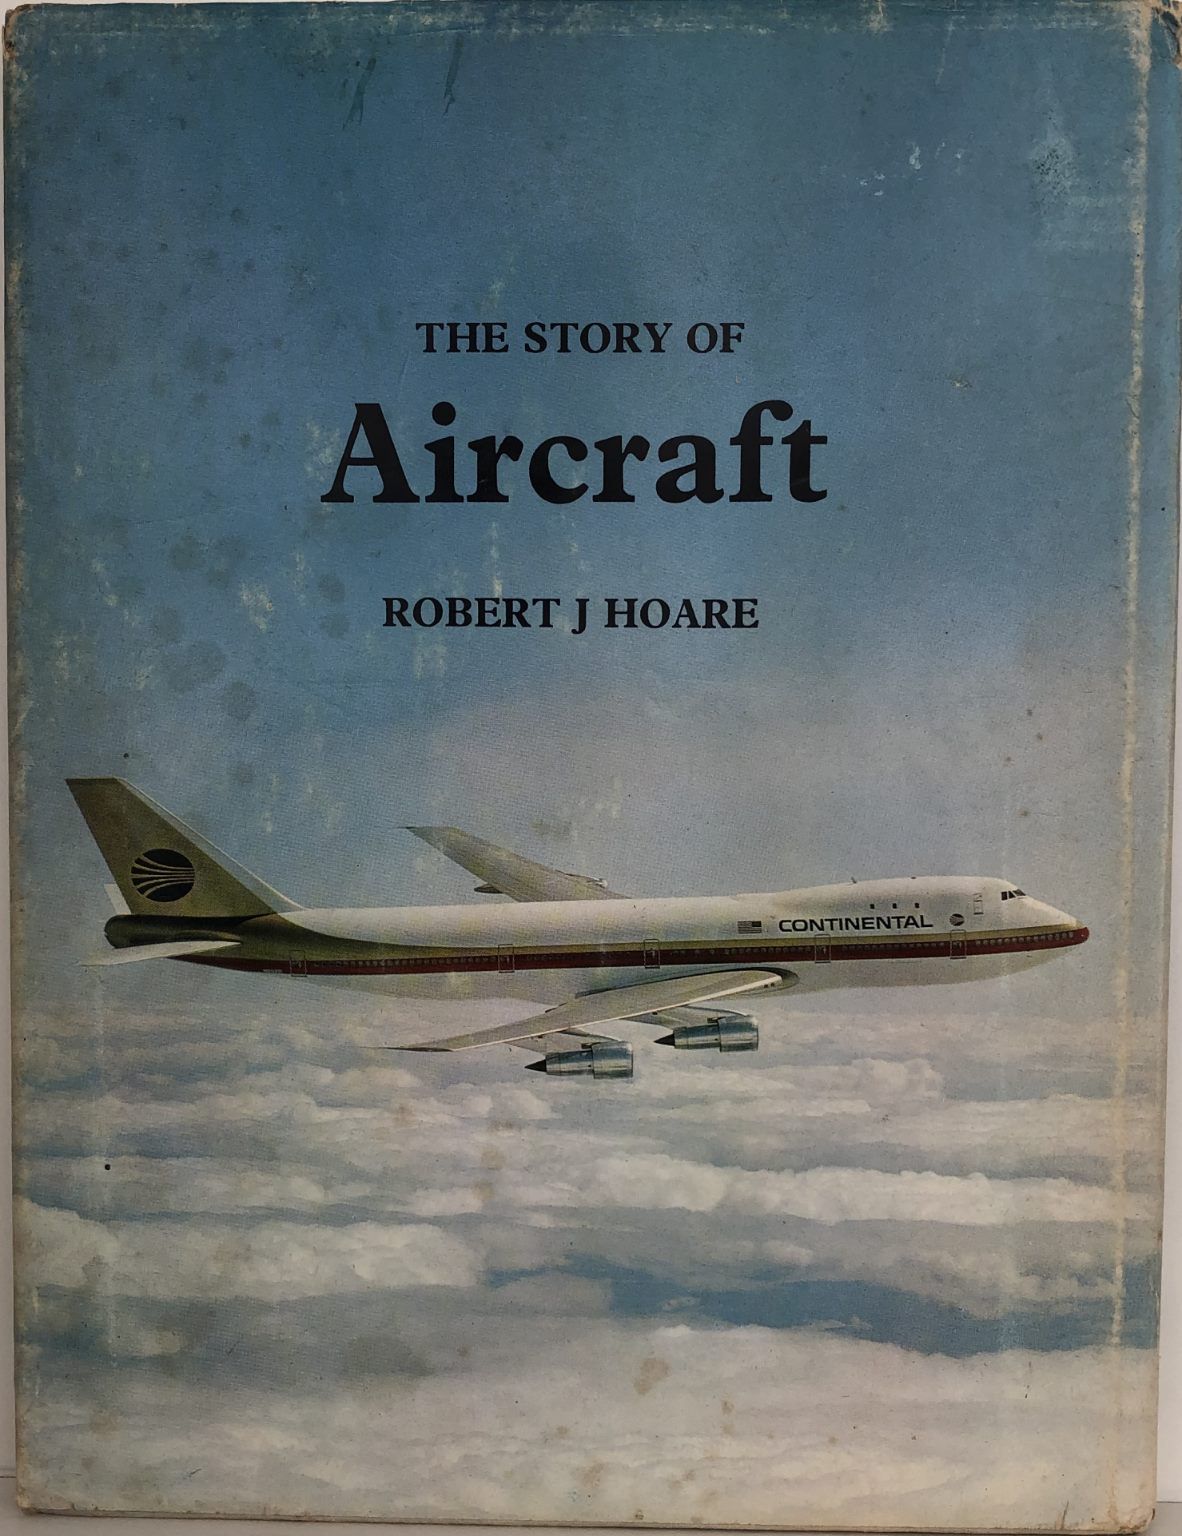 The Story of Aircraft